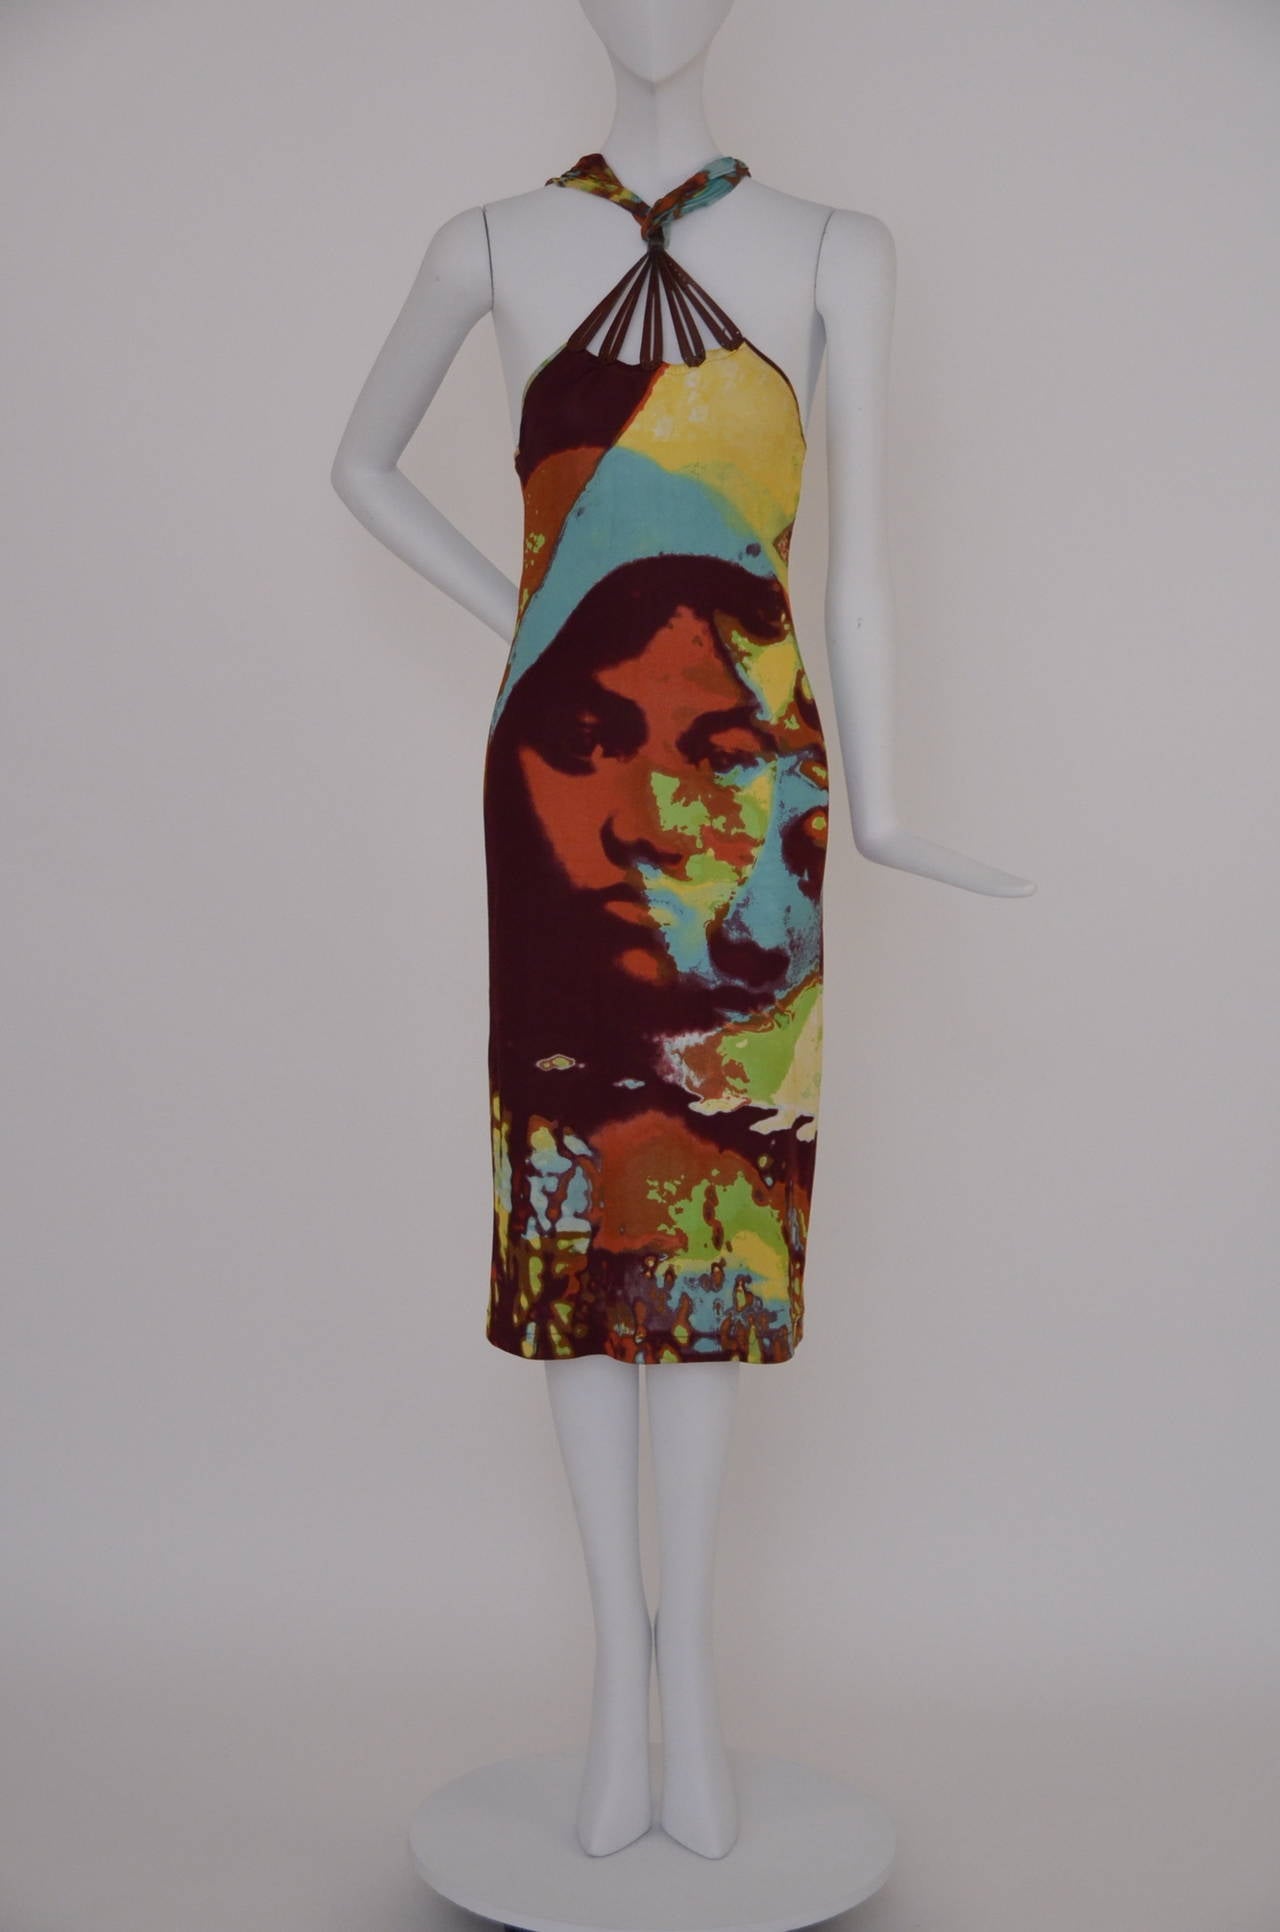 Jean Paul Gaultier  femme pop art face print  dress.
Size 6 US.
Very good condition.Leather straps in the  top front,silk straps.
Dress is 100% viscose fabric.
Made in Italy.

Final Sale.